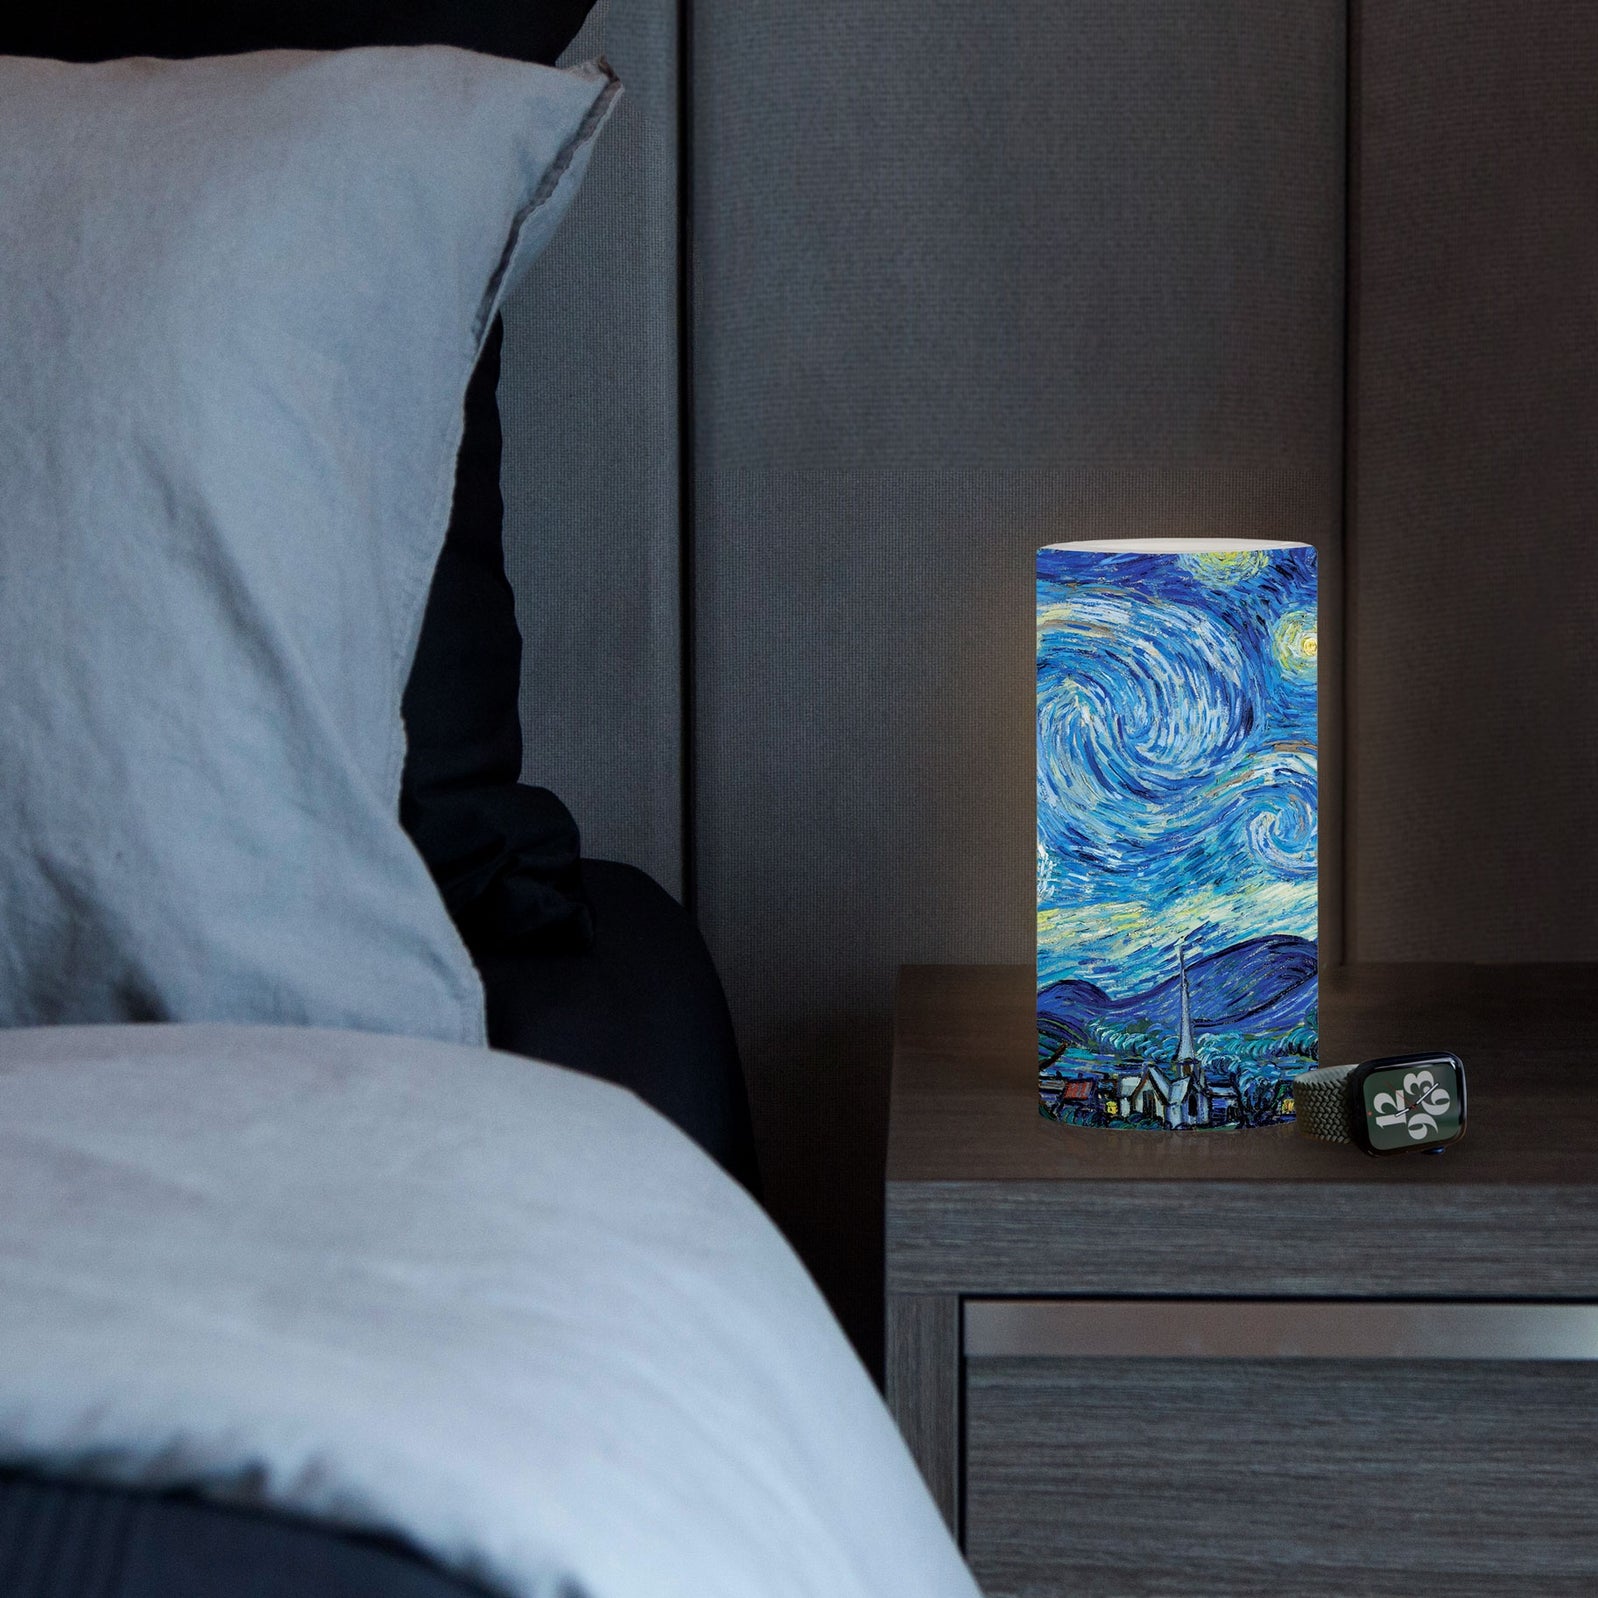 6" LED Flameless Wax Candle - Van Gogh "Starry Night"